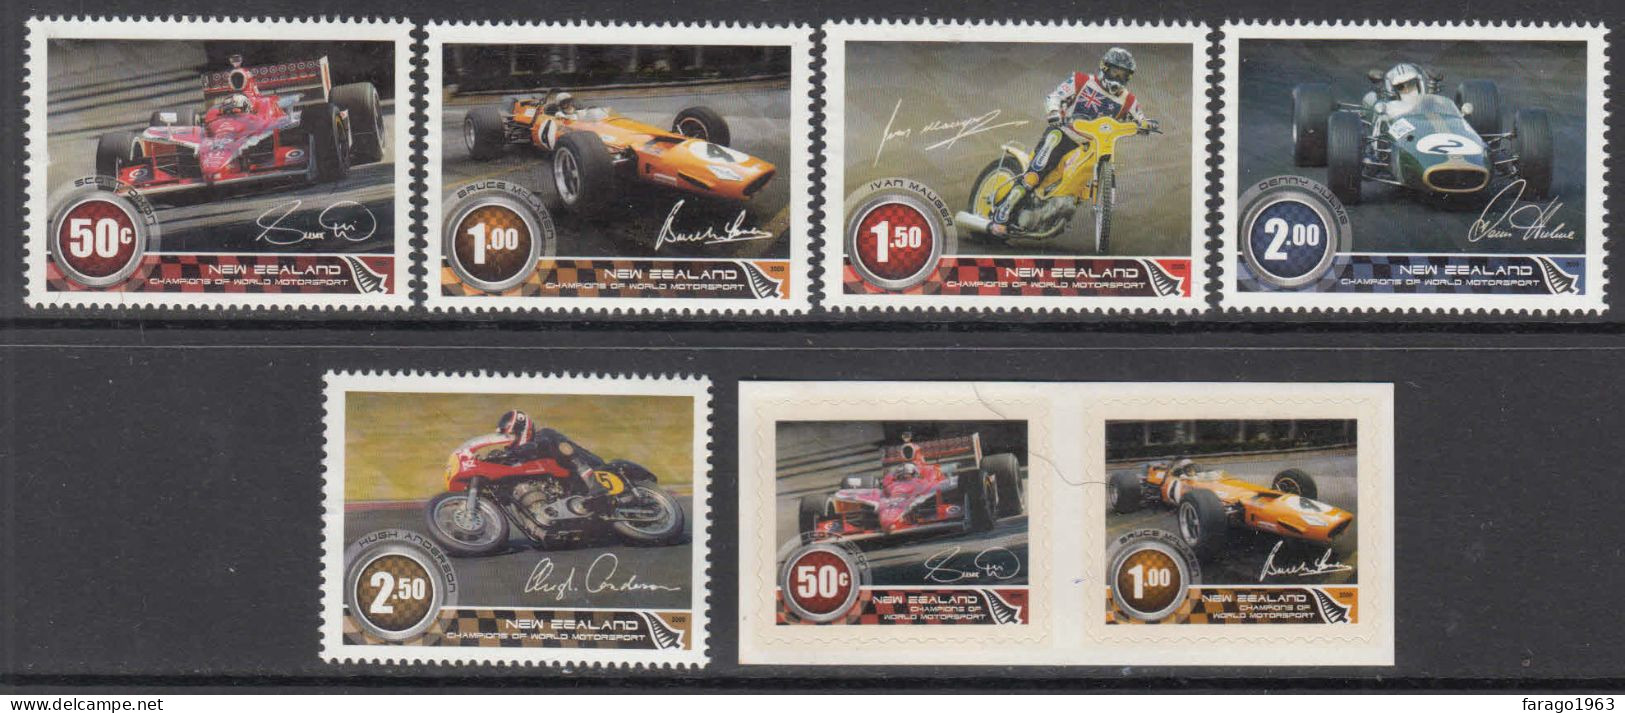 2009 New Zealand Motor Champions Car Racing Motorcycles Complete Set Of 7 MNH @ BELOW FACE VALUE - Unused Stamps